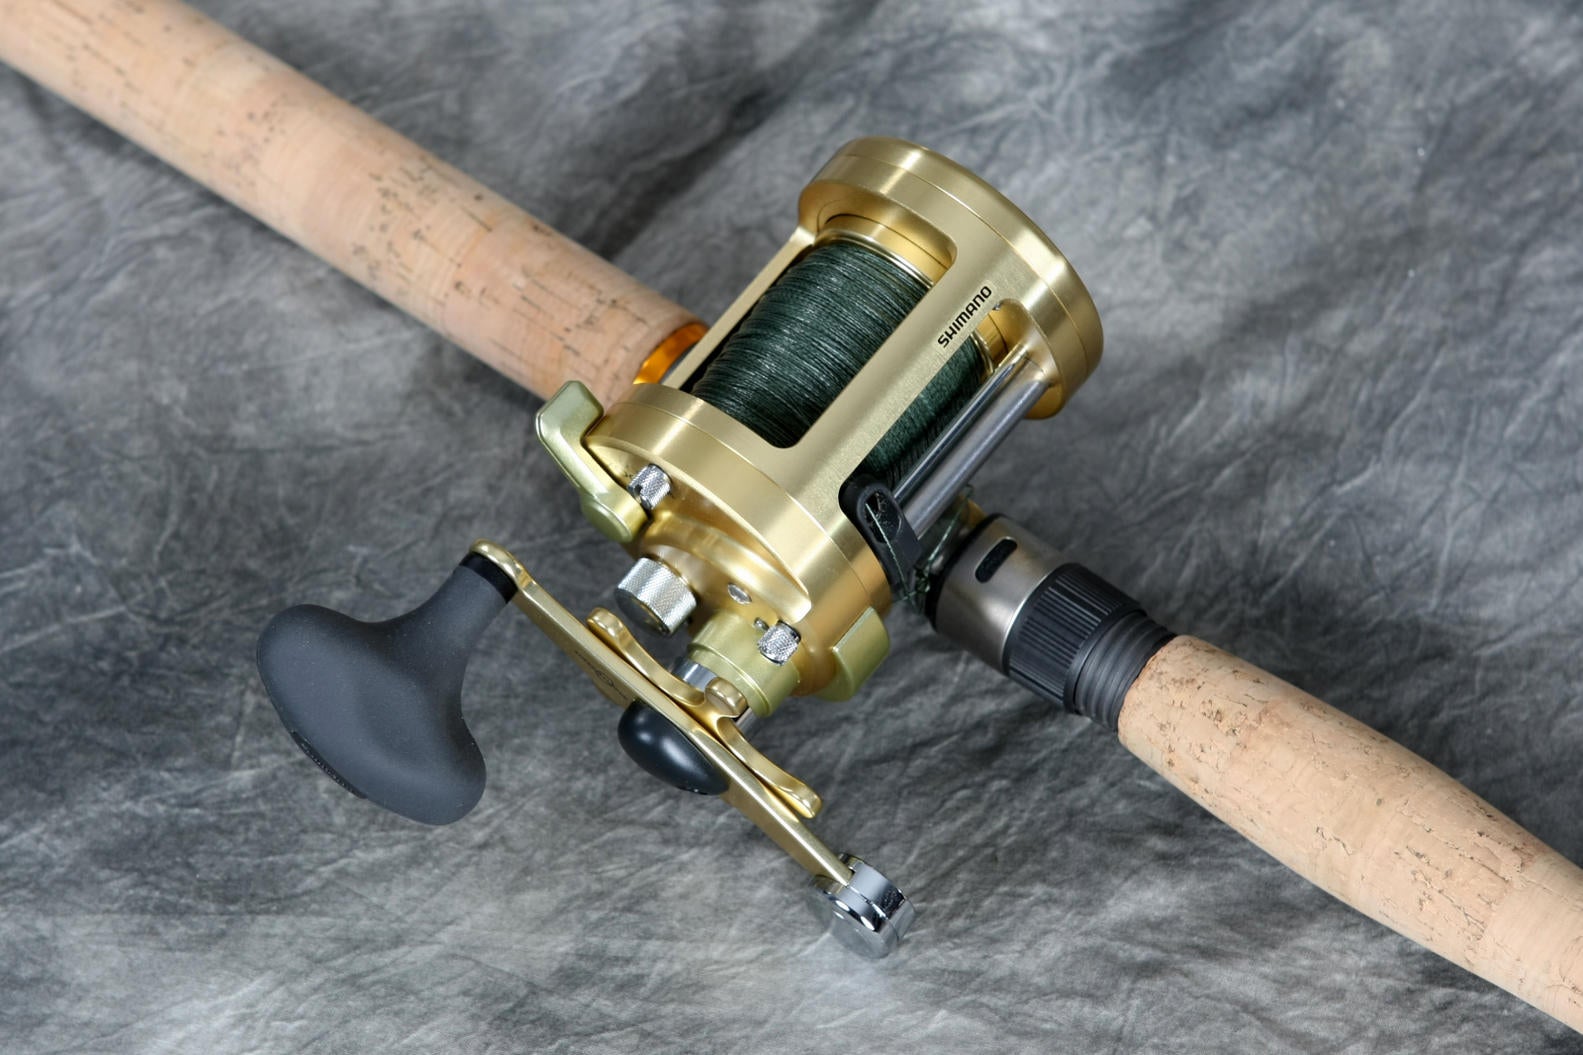 High price trolling rods, why? - General Discussion Forum